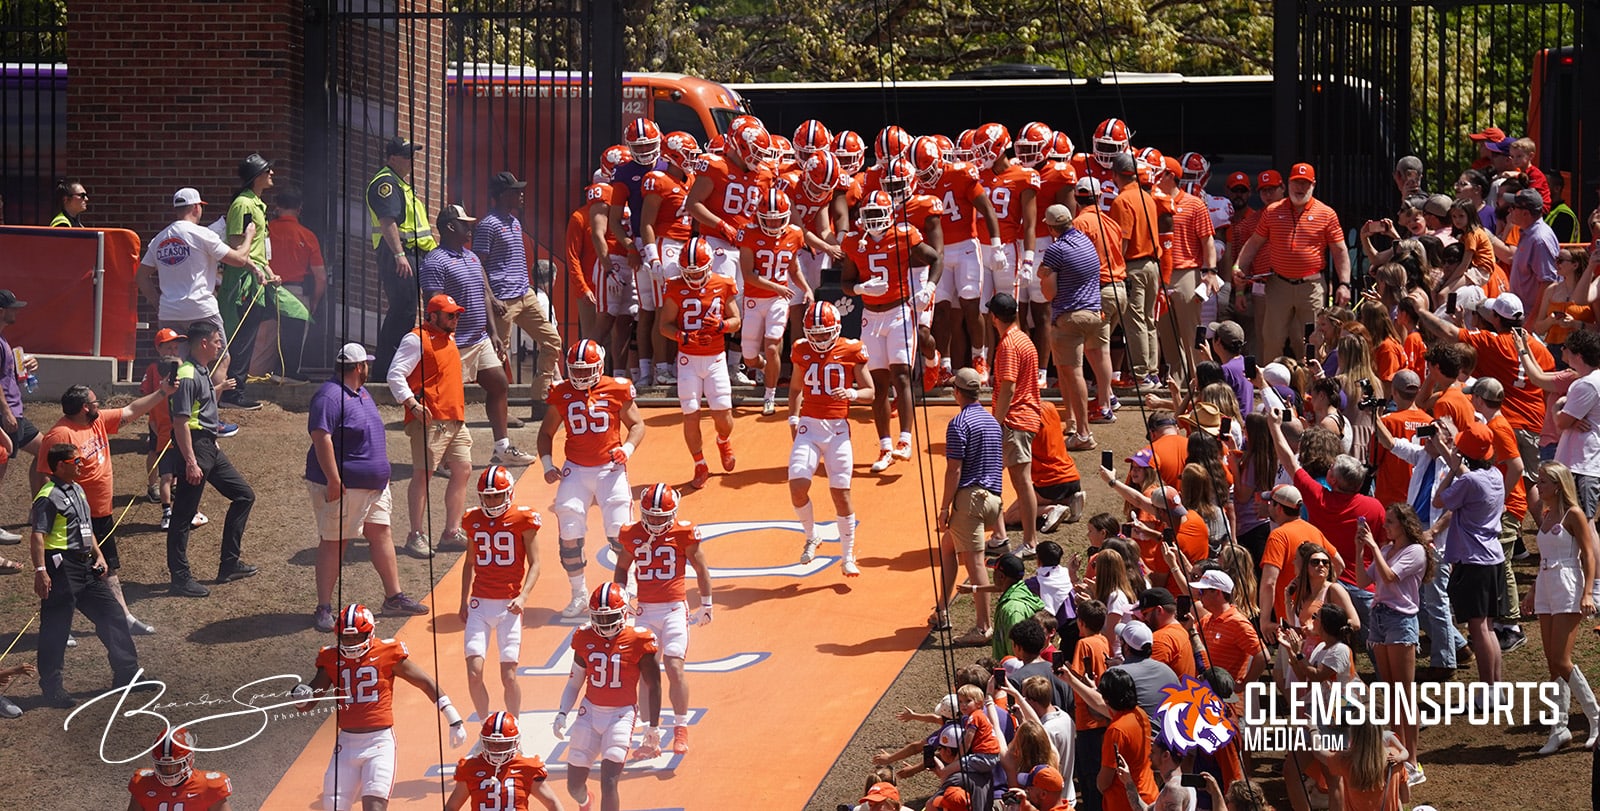 Clemson Spring Game - Running down the hill